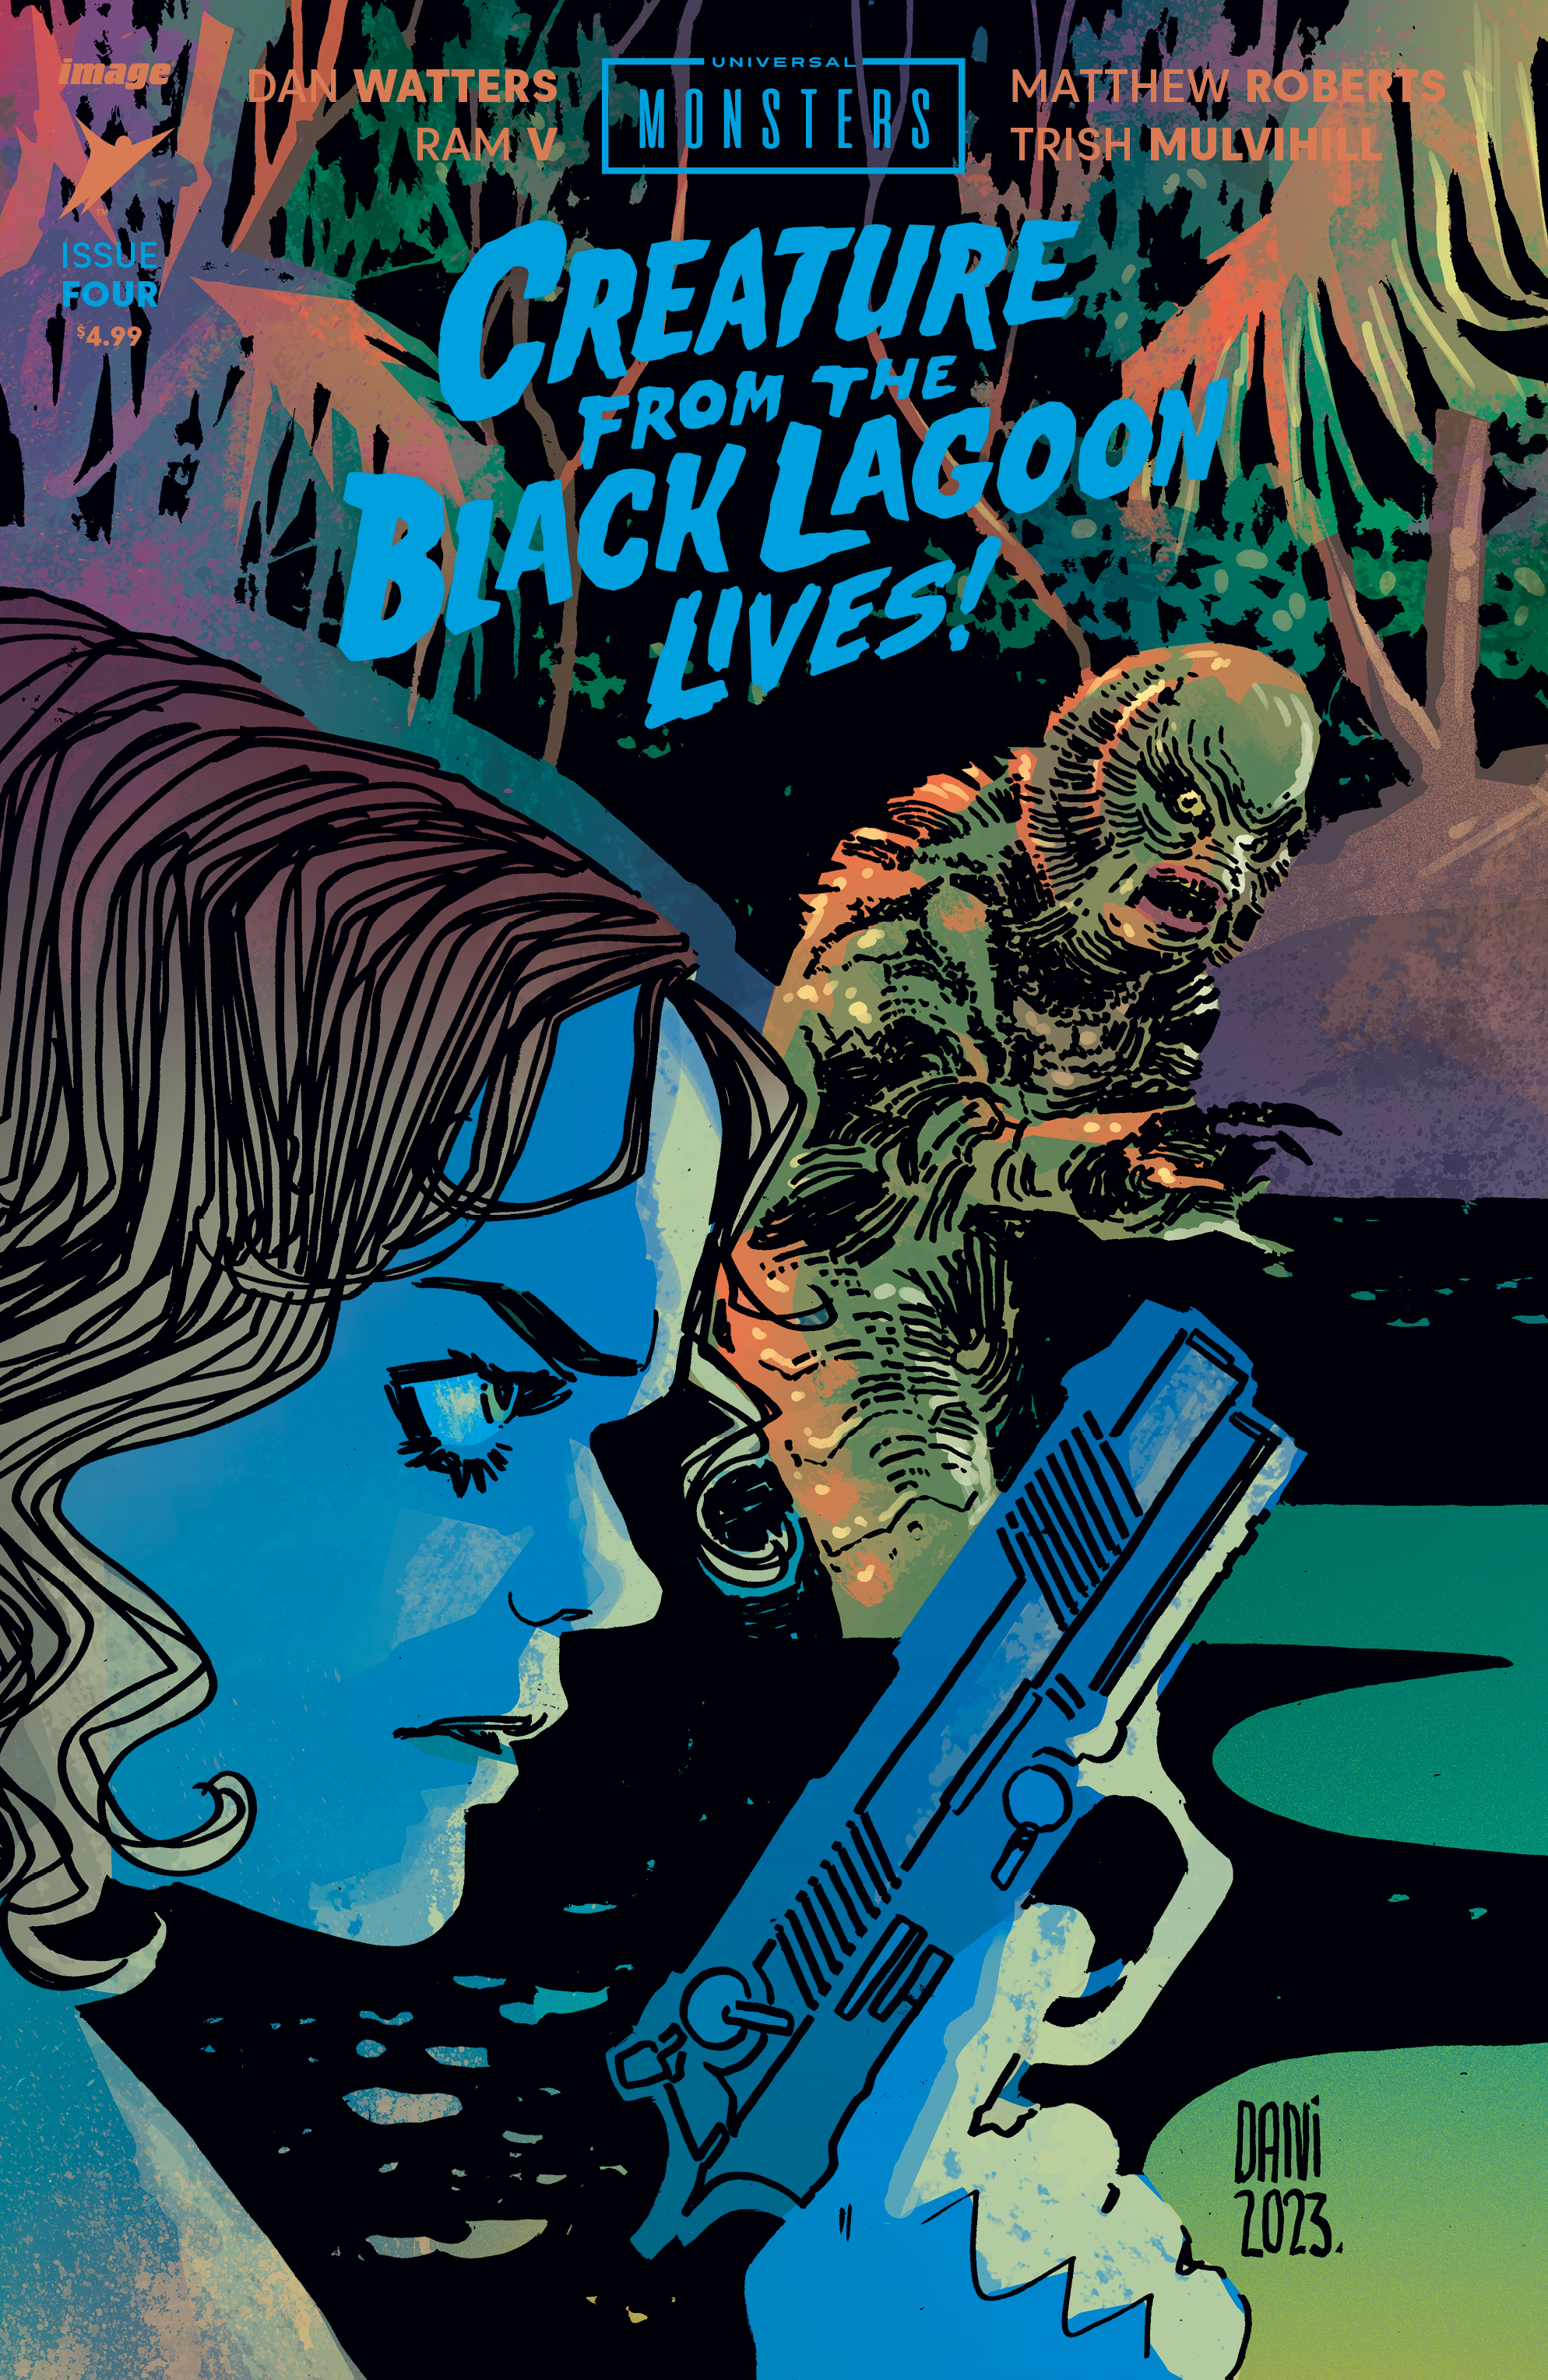 Universal Monsters the Creature from the Black Lagoon Lives #4 Cover C 1 for 10 Incentive Dani Connecting (Of 4)